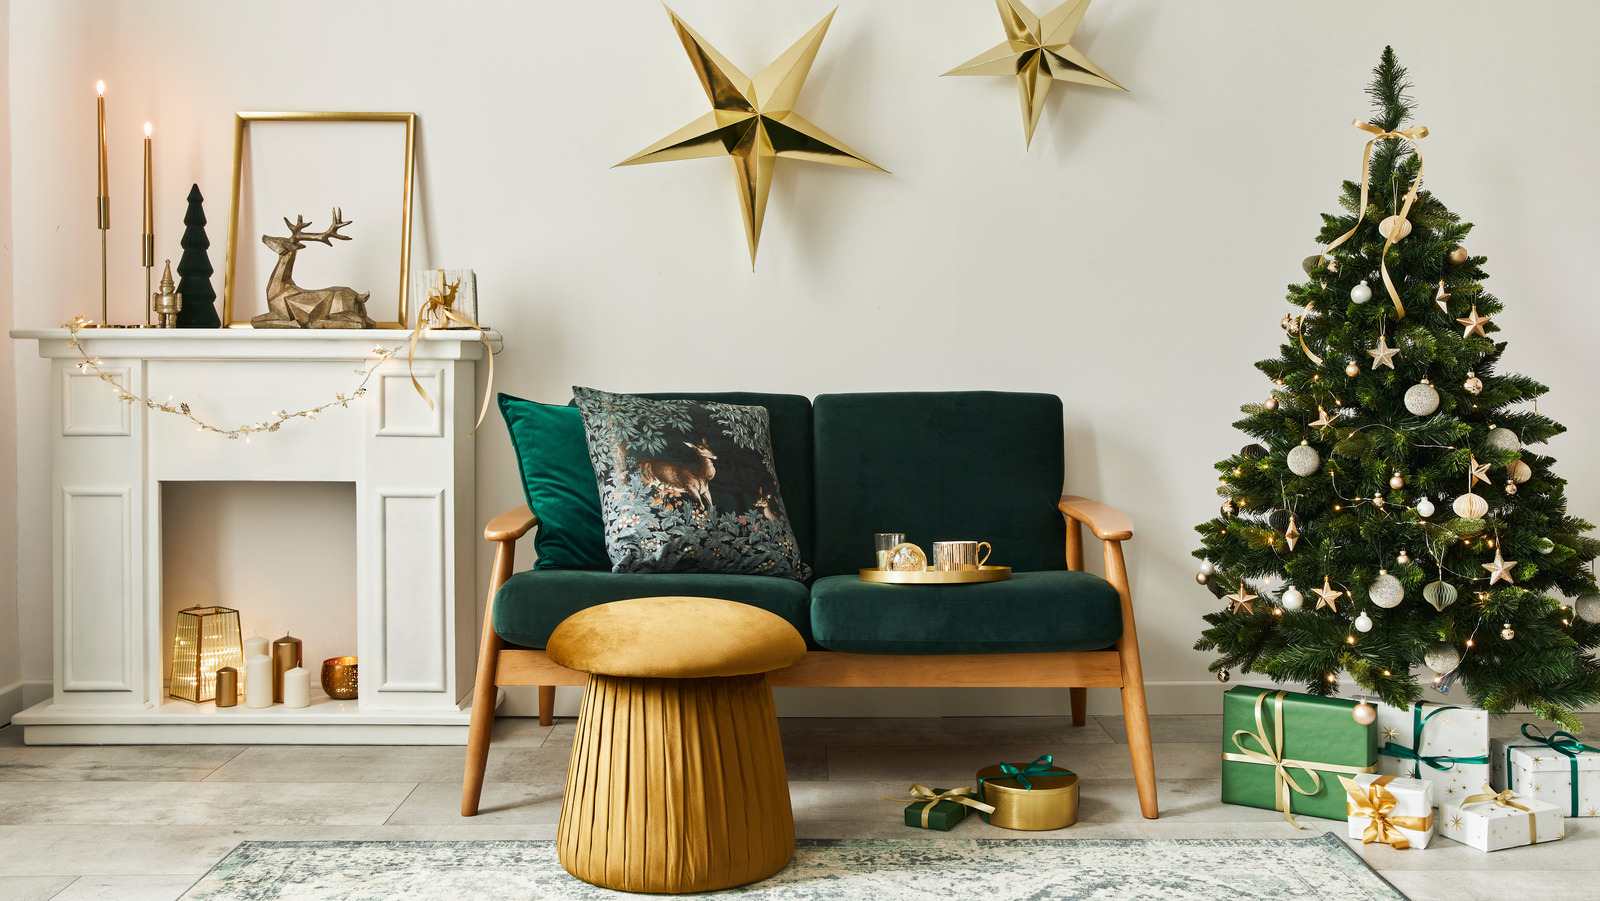 25 Holiday Decorating Ideas For Small Spaces